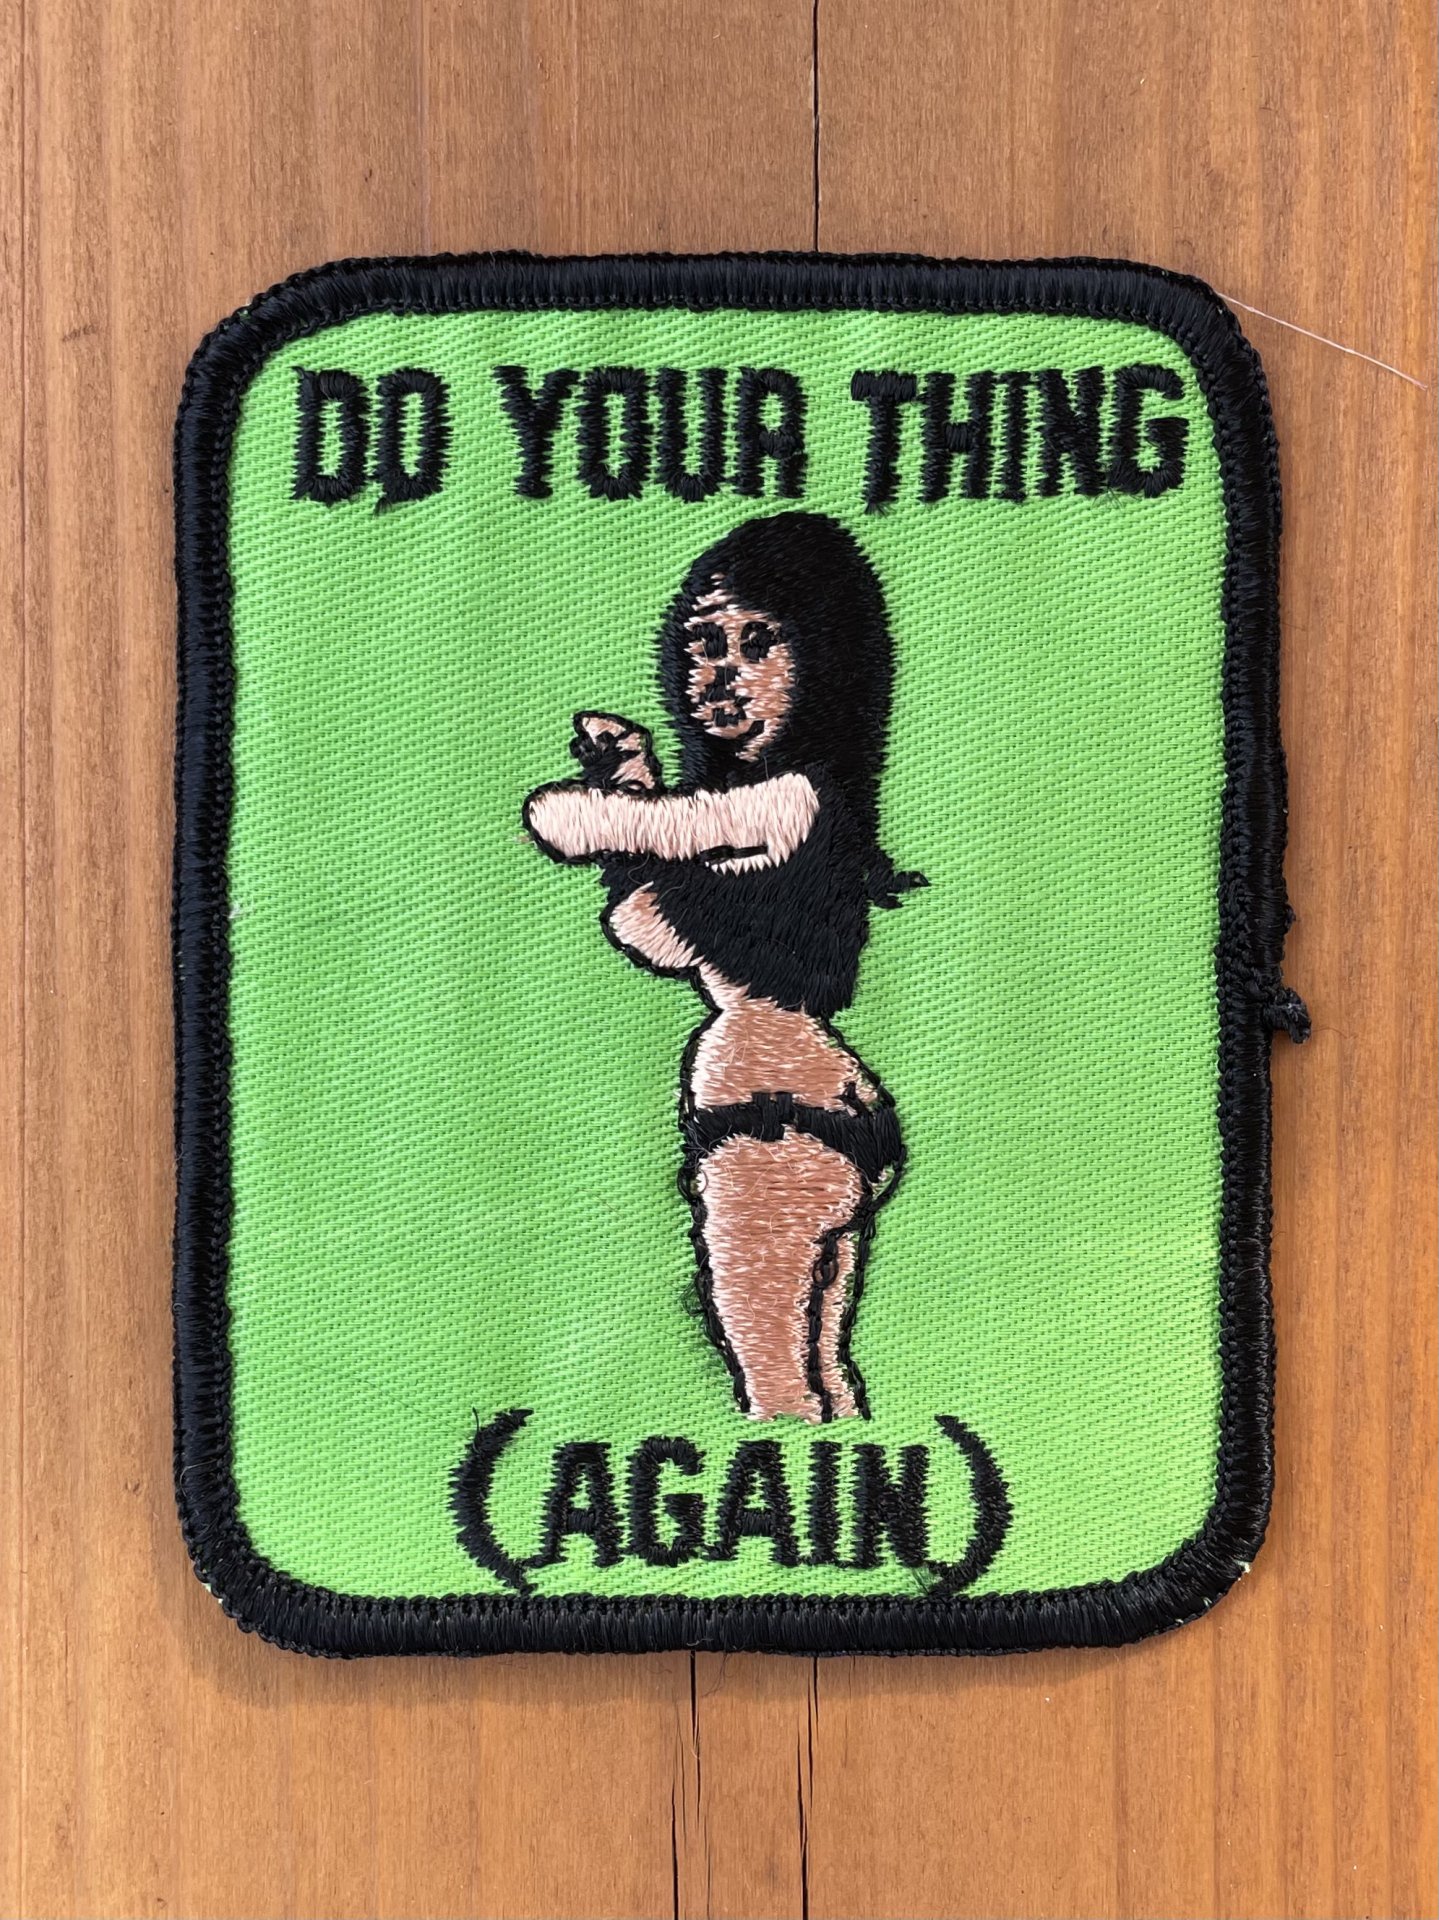 1970's DO YOUR THING (AGAIN) PATCH DEADSTOCK